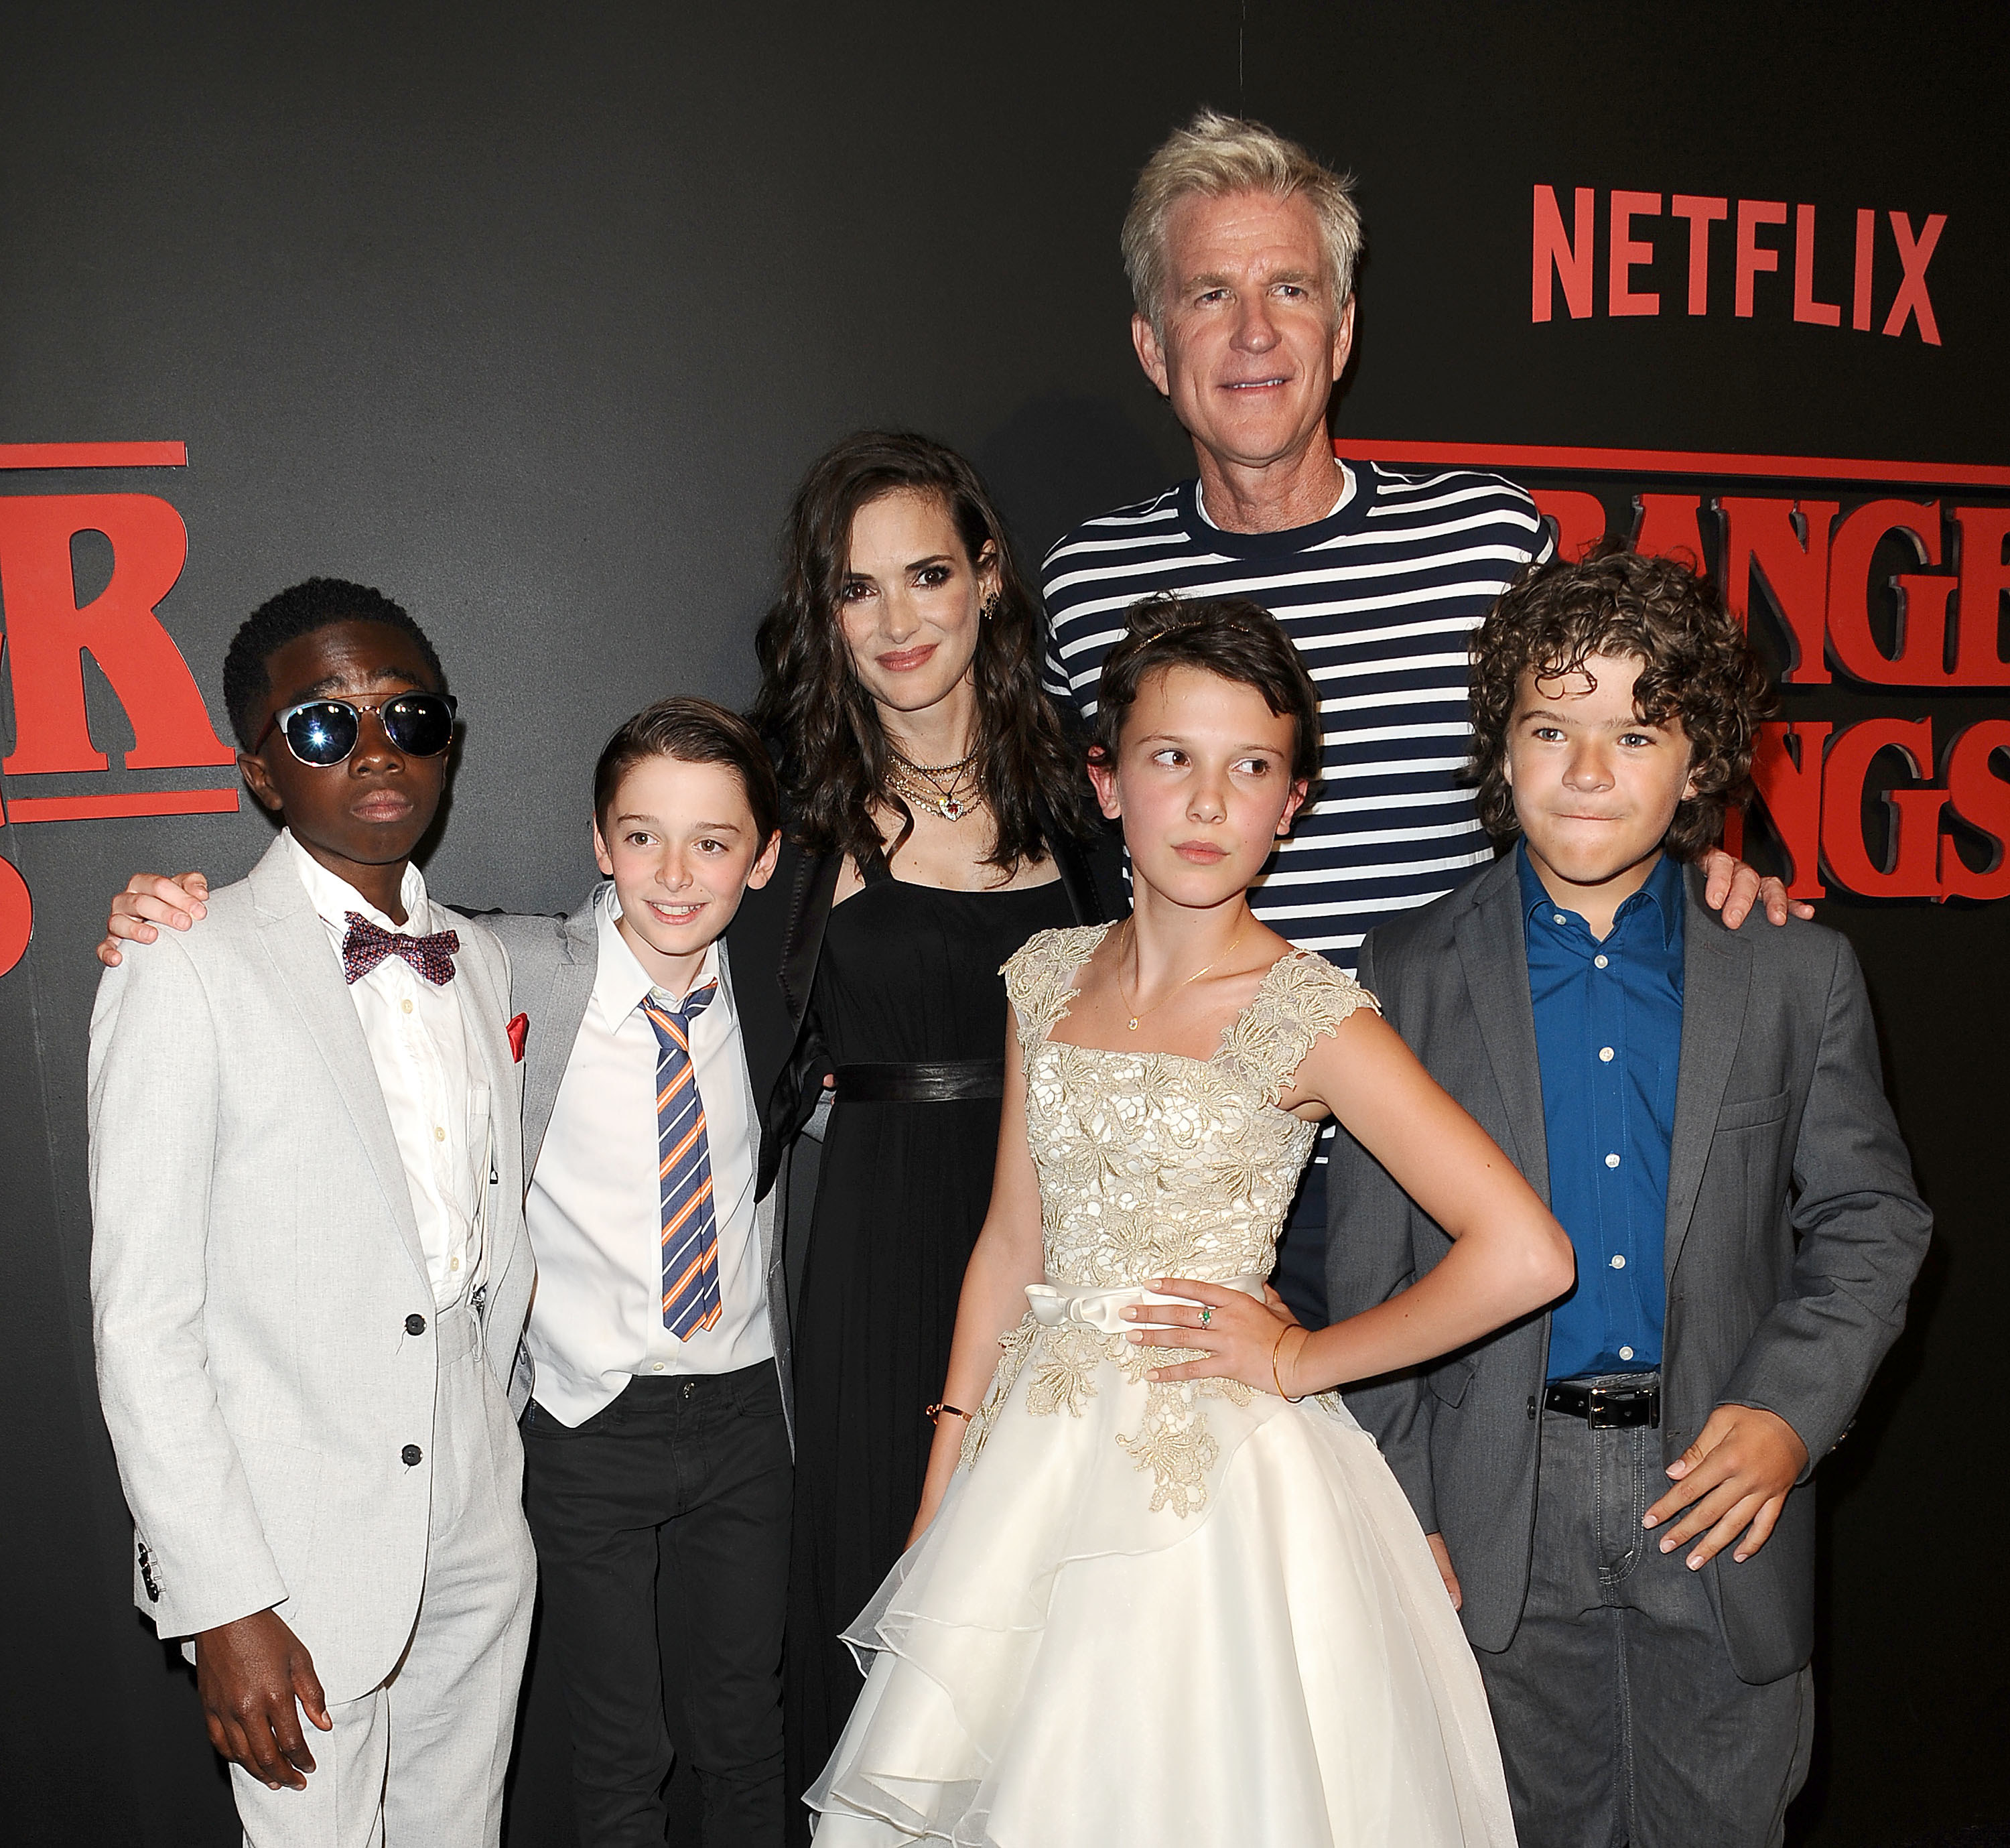 Photo shows the cast back in 2016 when season 1 filmed, all looking very young! The photo includes Caleb McLaughlin (Lucas), Noah Schnapp (Will), Winona Ryder (Joyce), Matthew Modine (Brenner), Millie Bobby Brown (Eleven), and Gaten Matarazzo (Dustin)